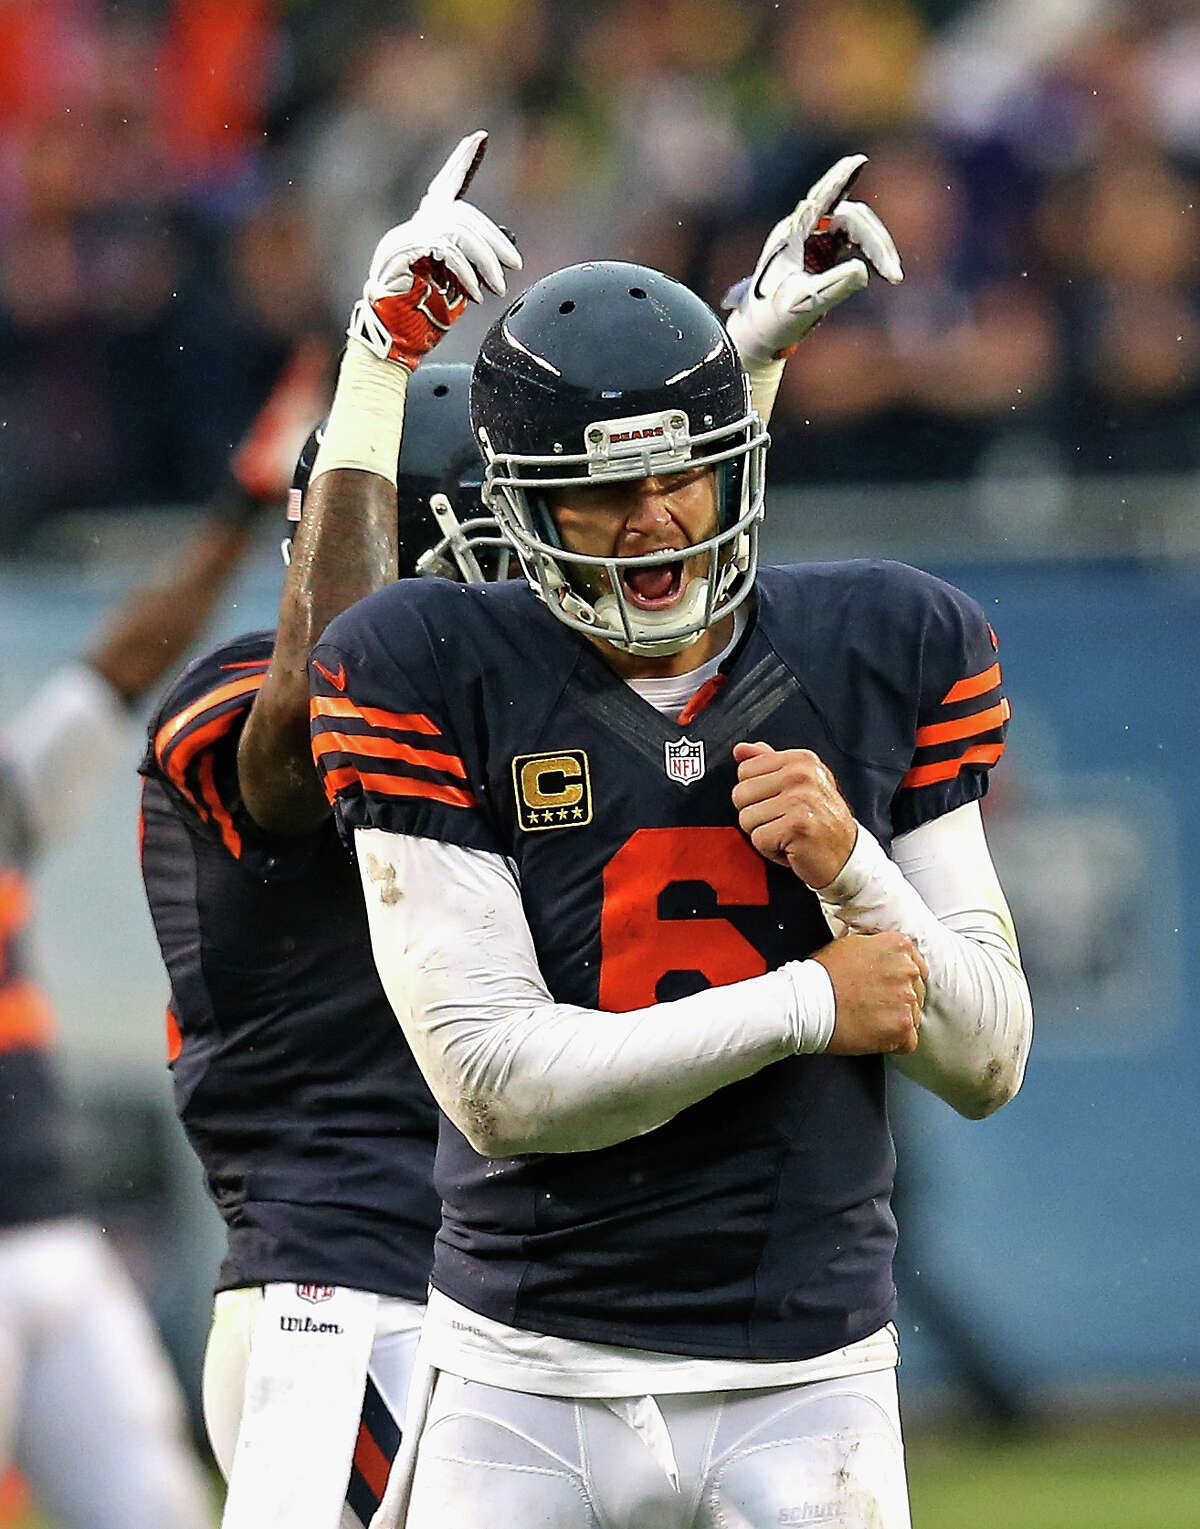 CHICAGO, IL - SEPTEMBER 15: Jay Cutler #6 and Alshon Jeffery #17 of the Chicago Bears celebrate the game-winning extra point against the Minnesota Vikings at Soldier Field on September 15, 2013 in Chicago, Illinois. The Bears defeated the Vikings 31-30.